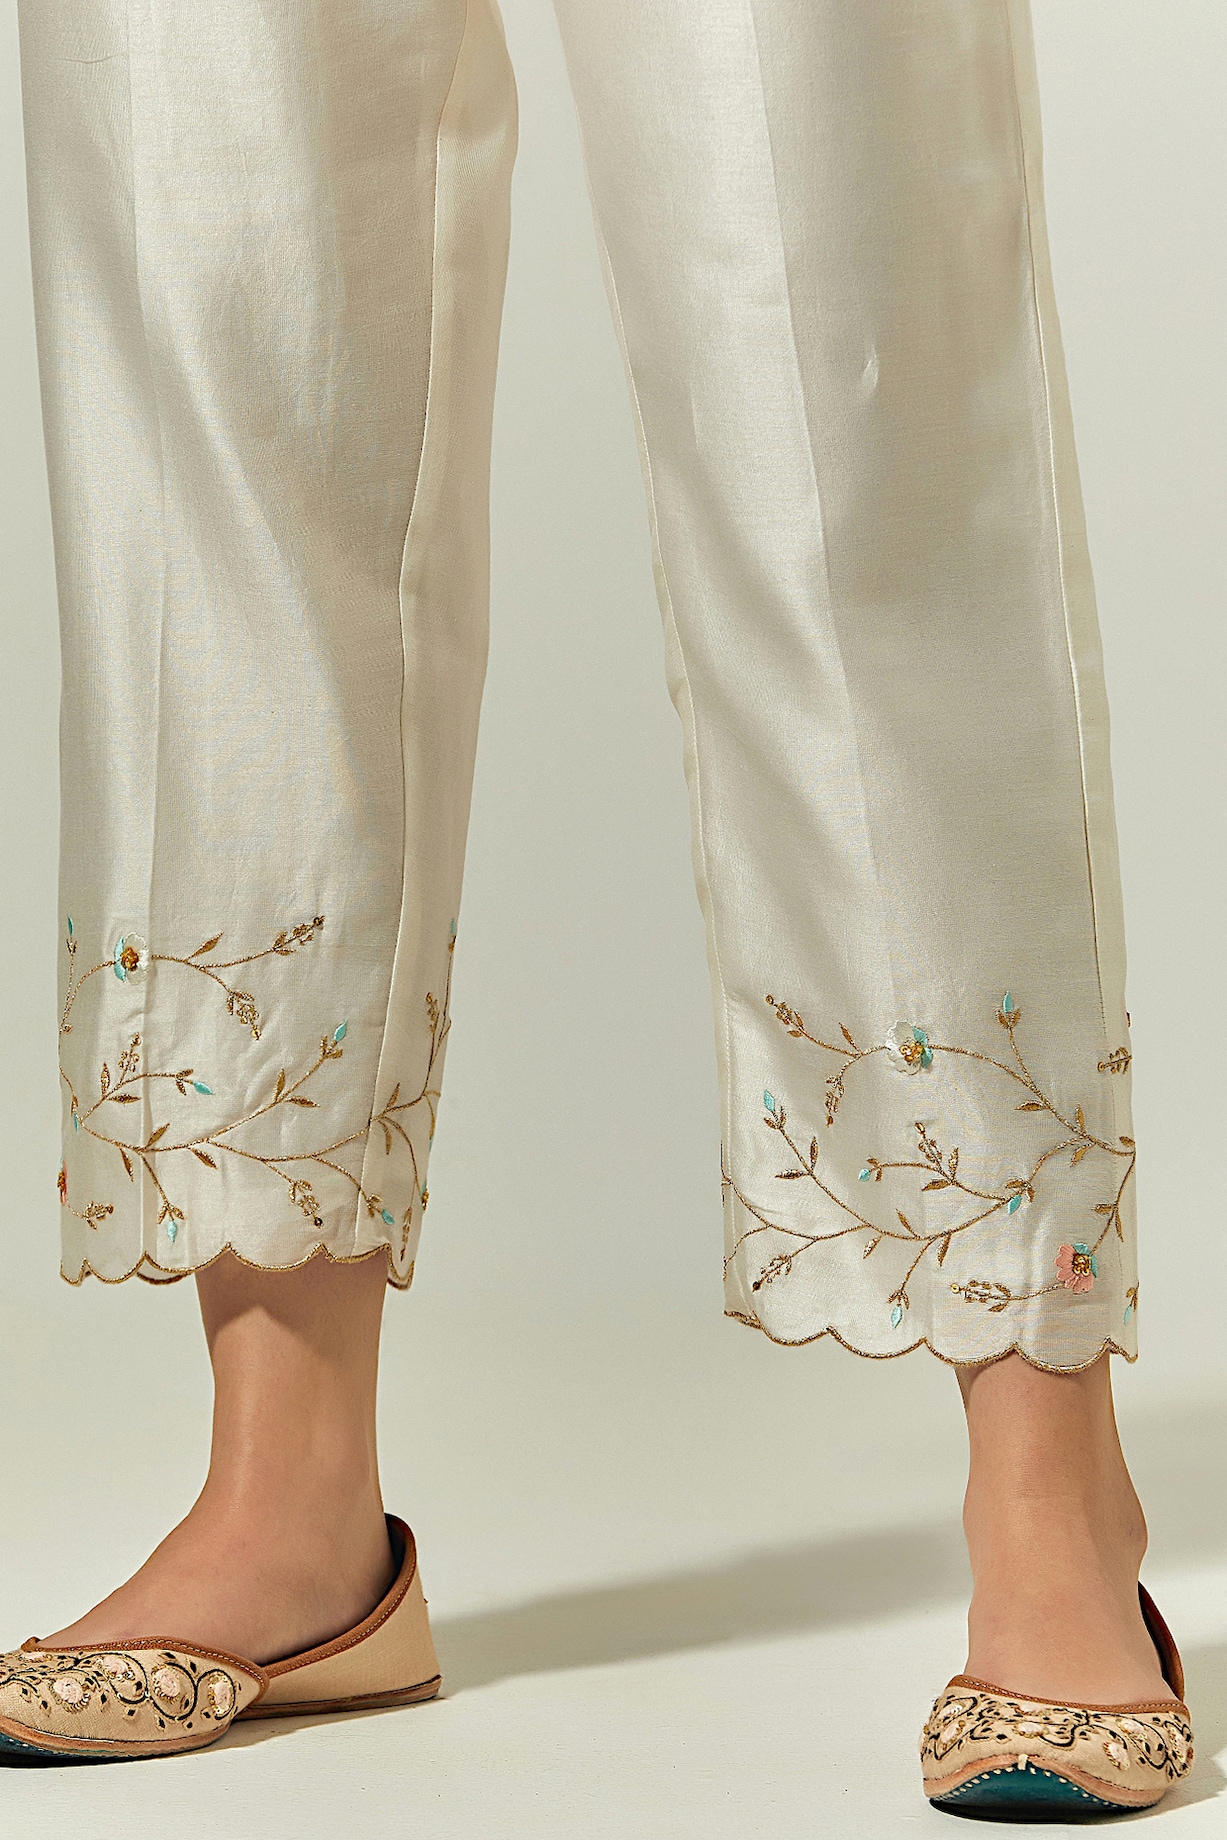 Buy AliColours Embroidered Pakistani Rayon Cigarette Pant White at